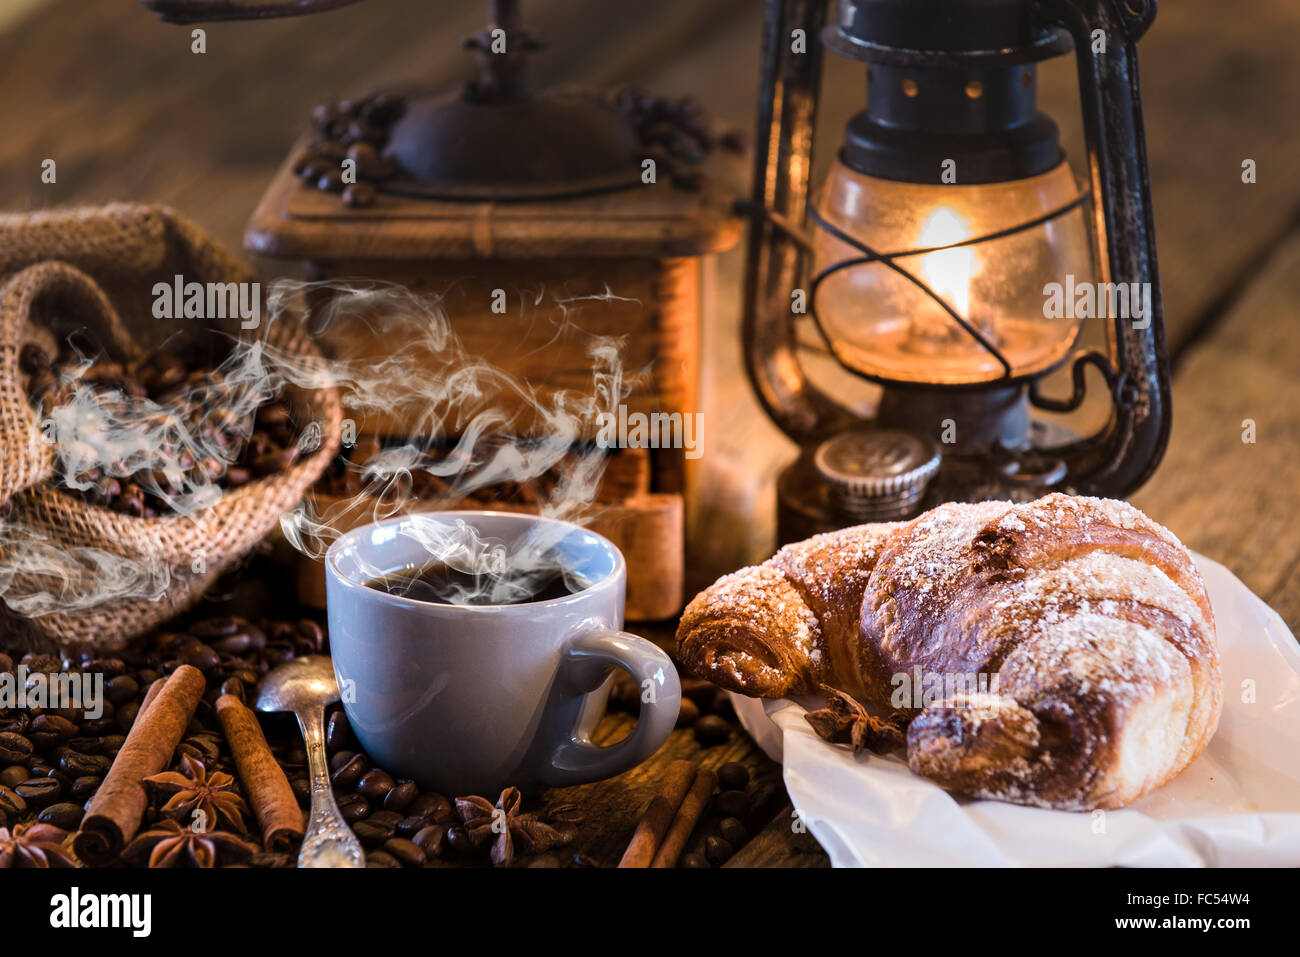 Rural Italian breakfast of coffee and croissant on a wooden table with a kerosene lamp. Stock Photo